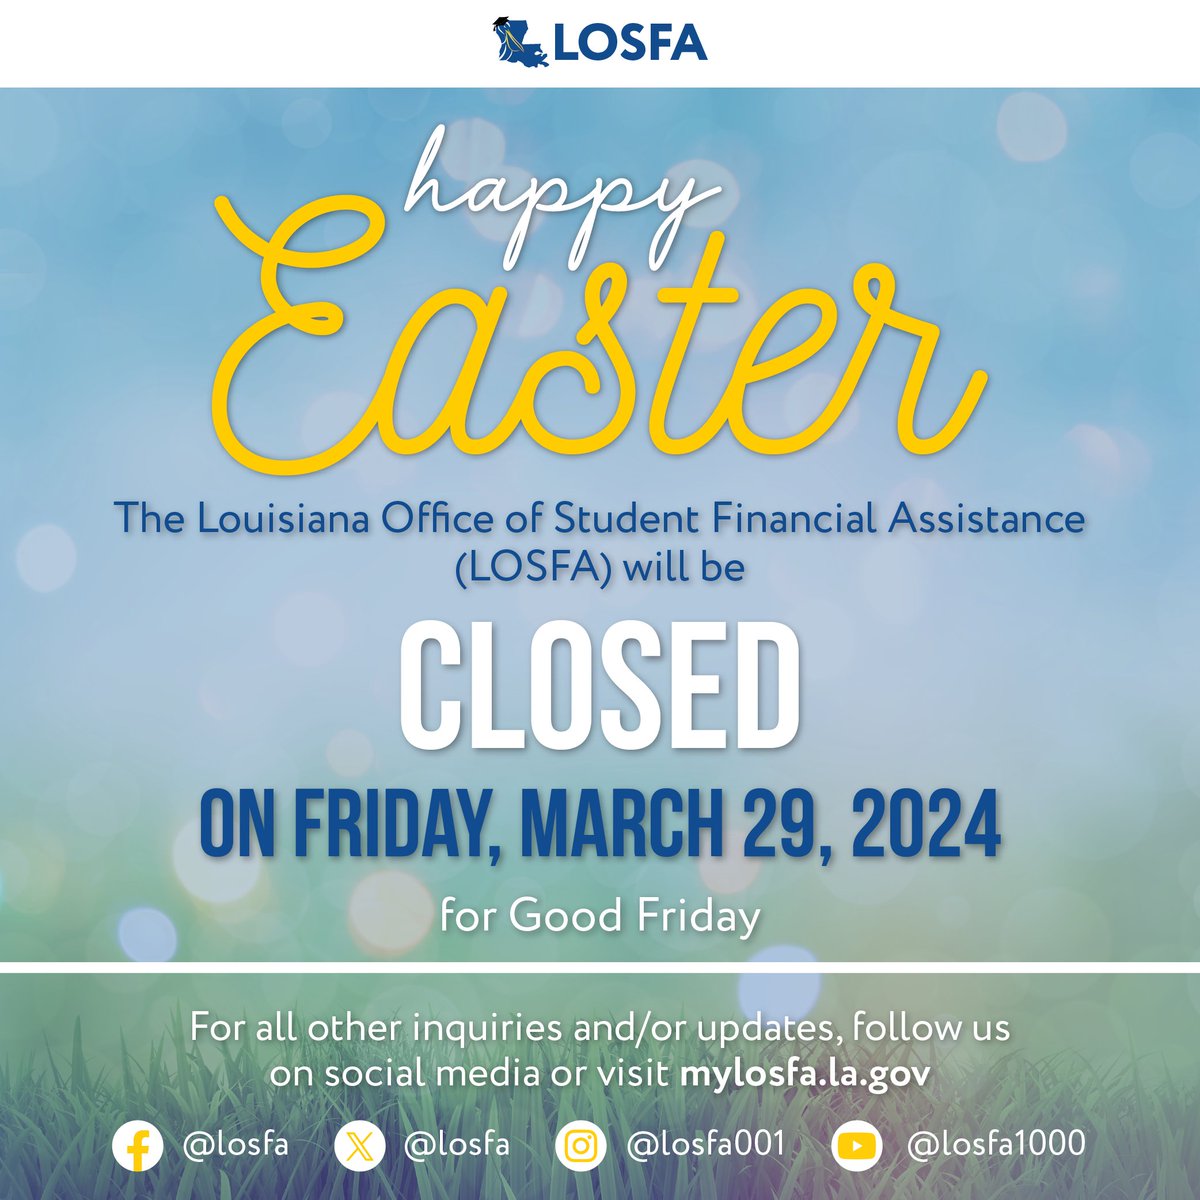 The Louisiana Office of Student Financial Assistance (LOSFA) will be closed on Friday, March 29, in honor of Good Friday.